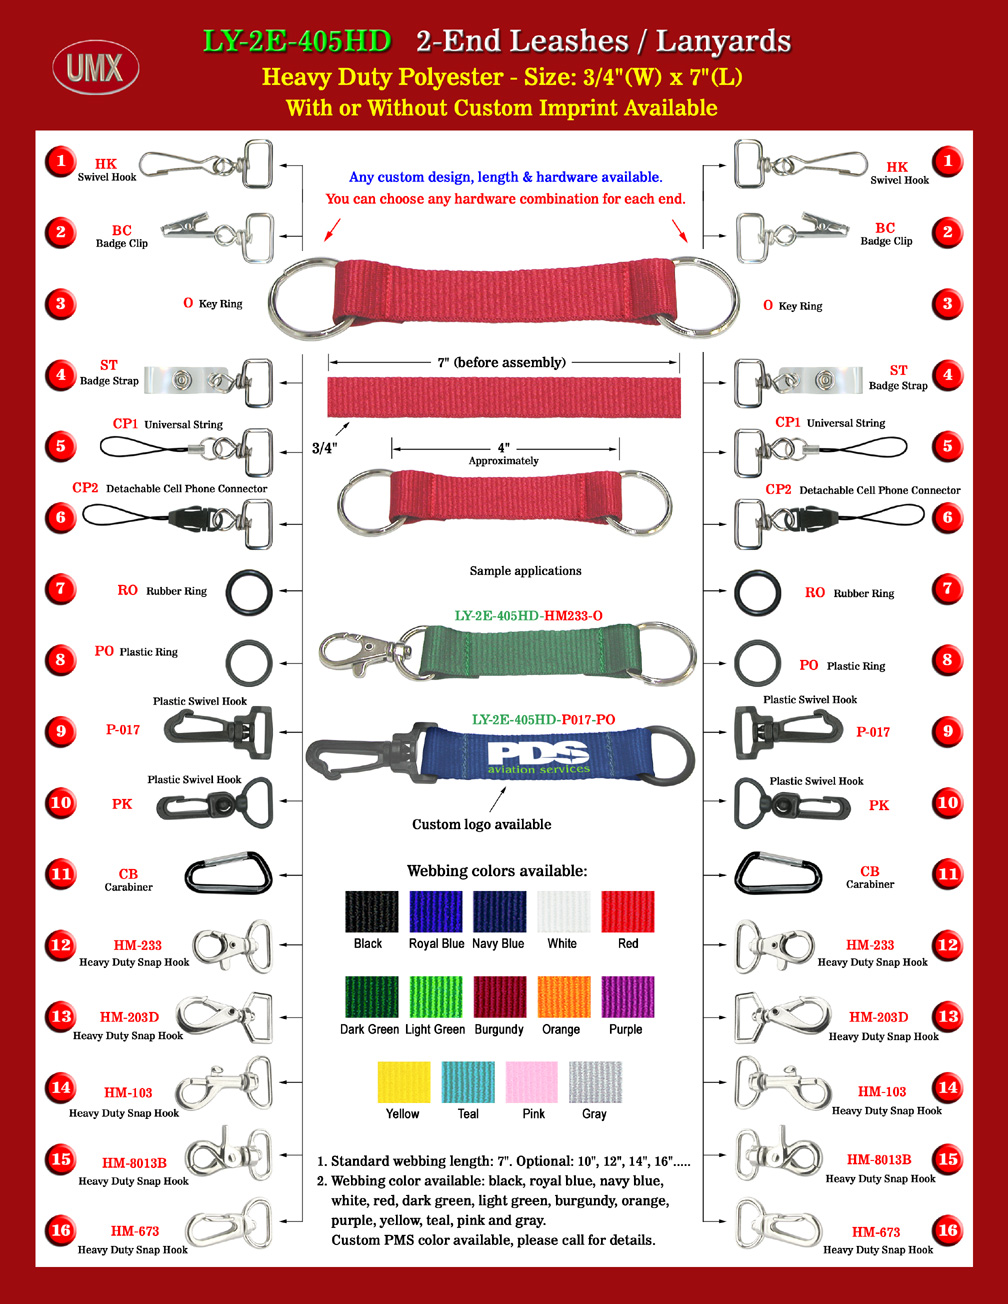 Depending on your leash application you can choose rubber, plastic or metal parts at each end, or two difference material at each of leashes. 